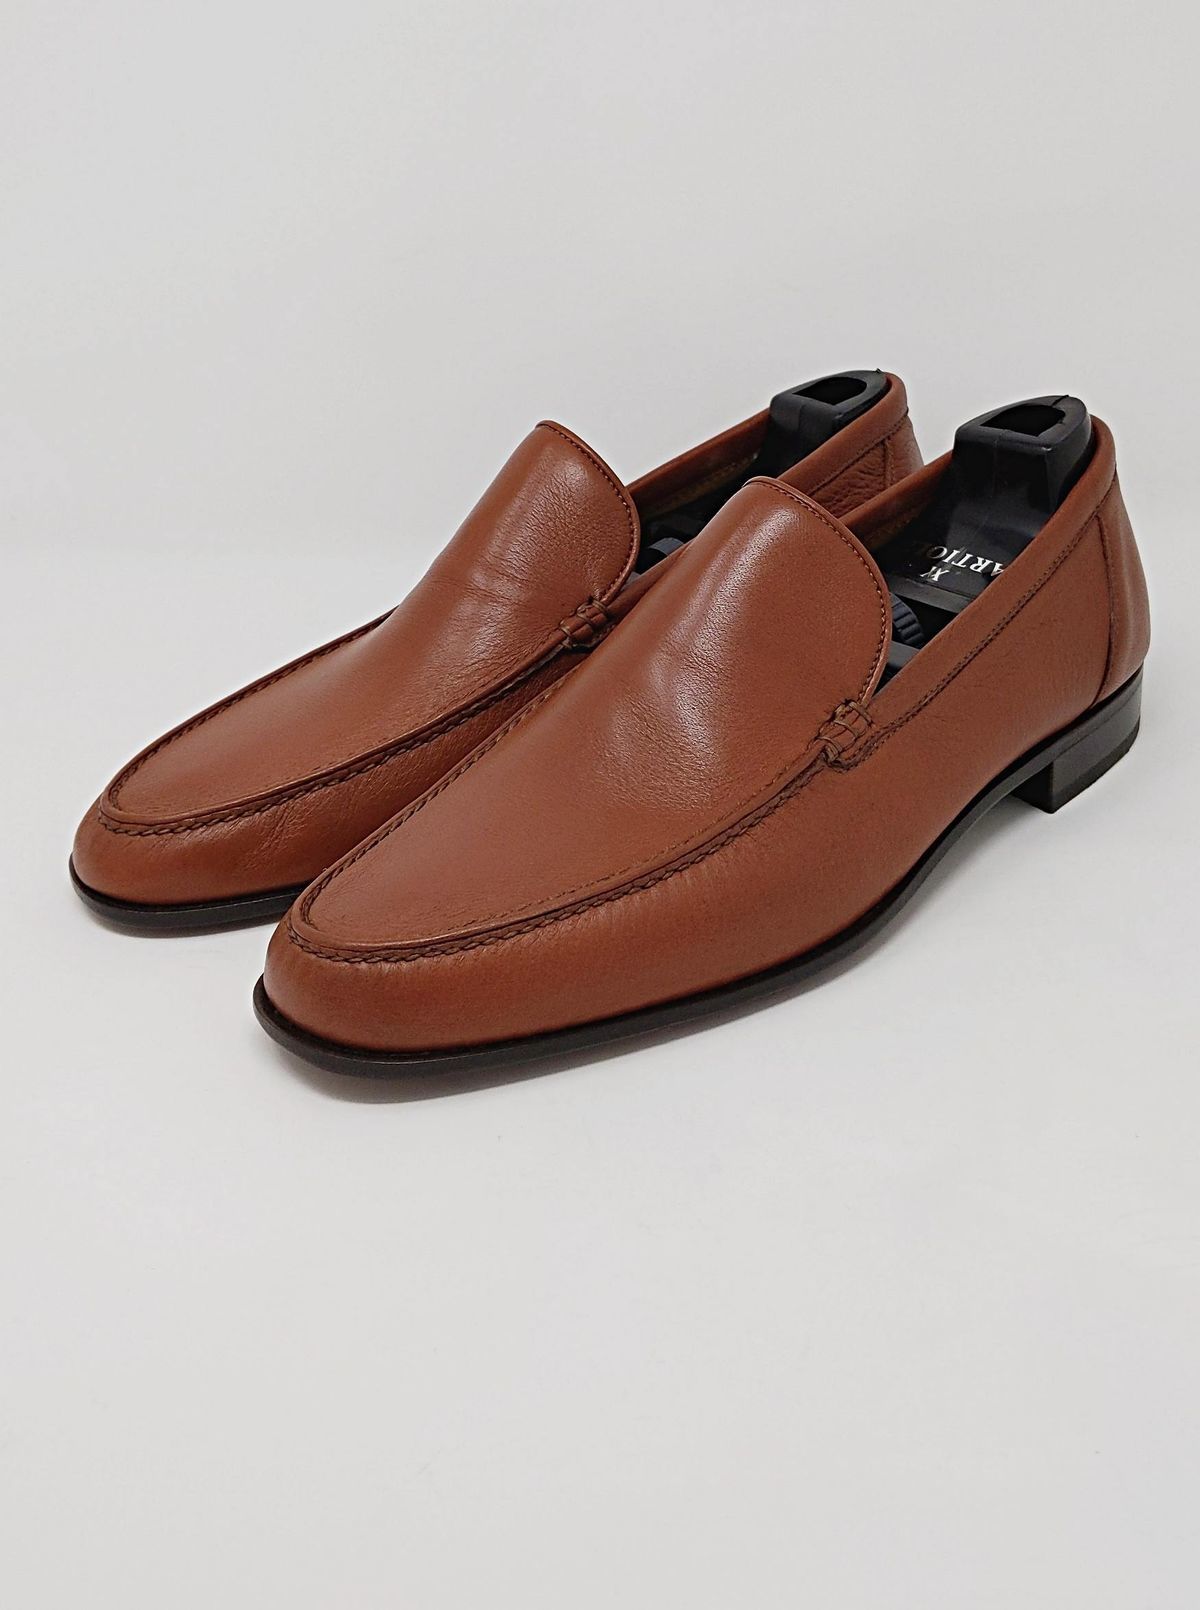 Venetian Loafer By Artioli at Maus & Hoffman